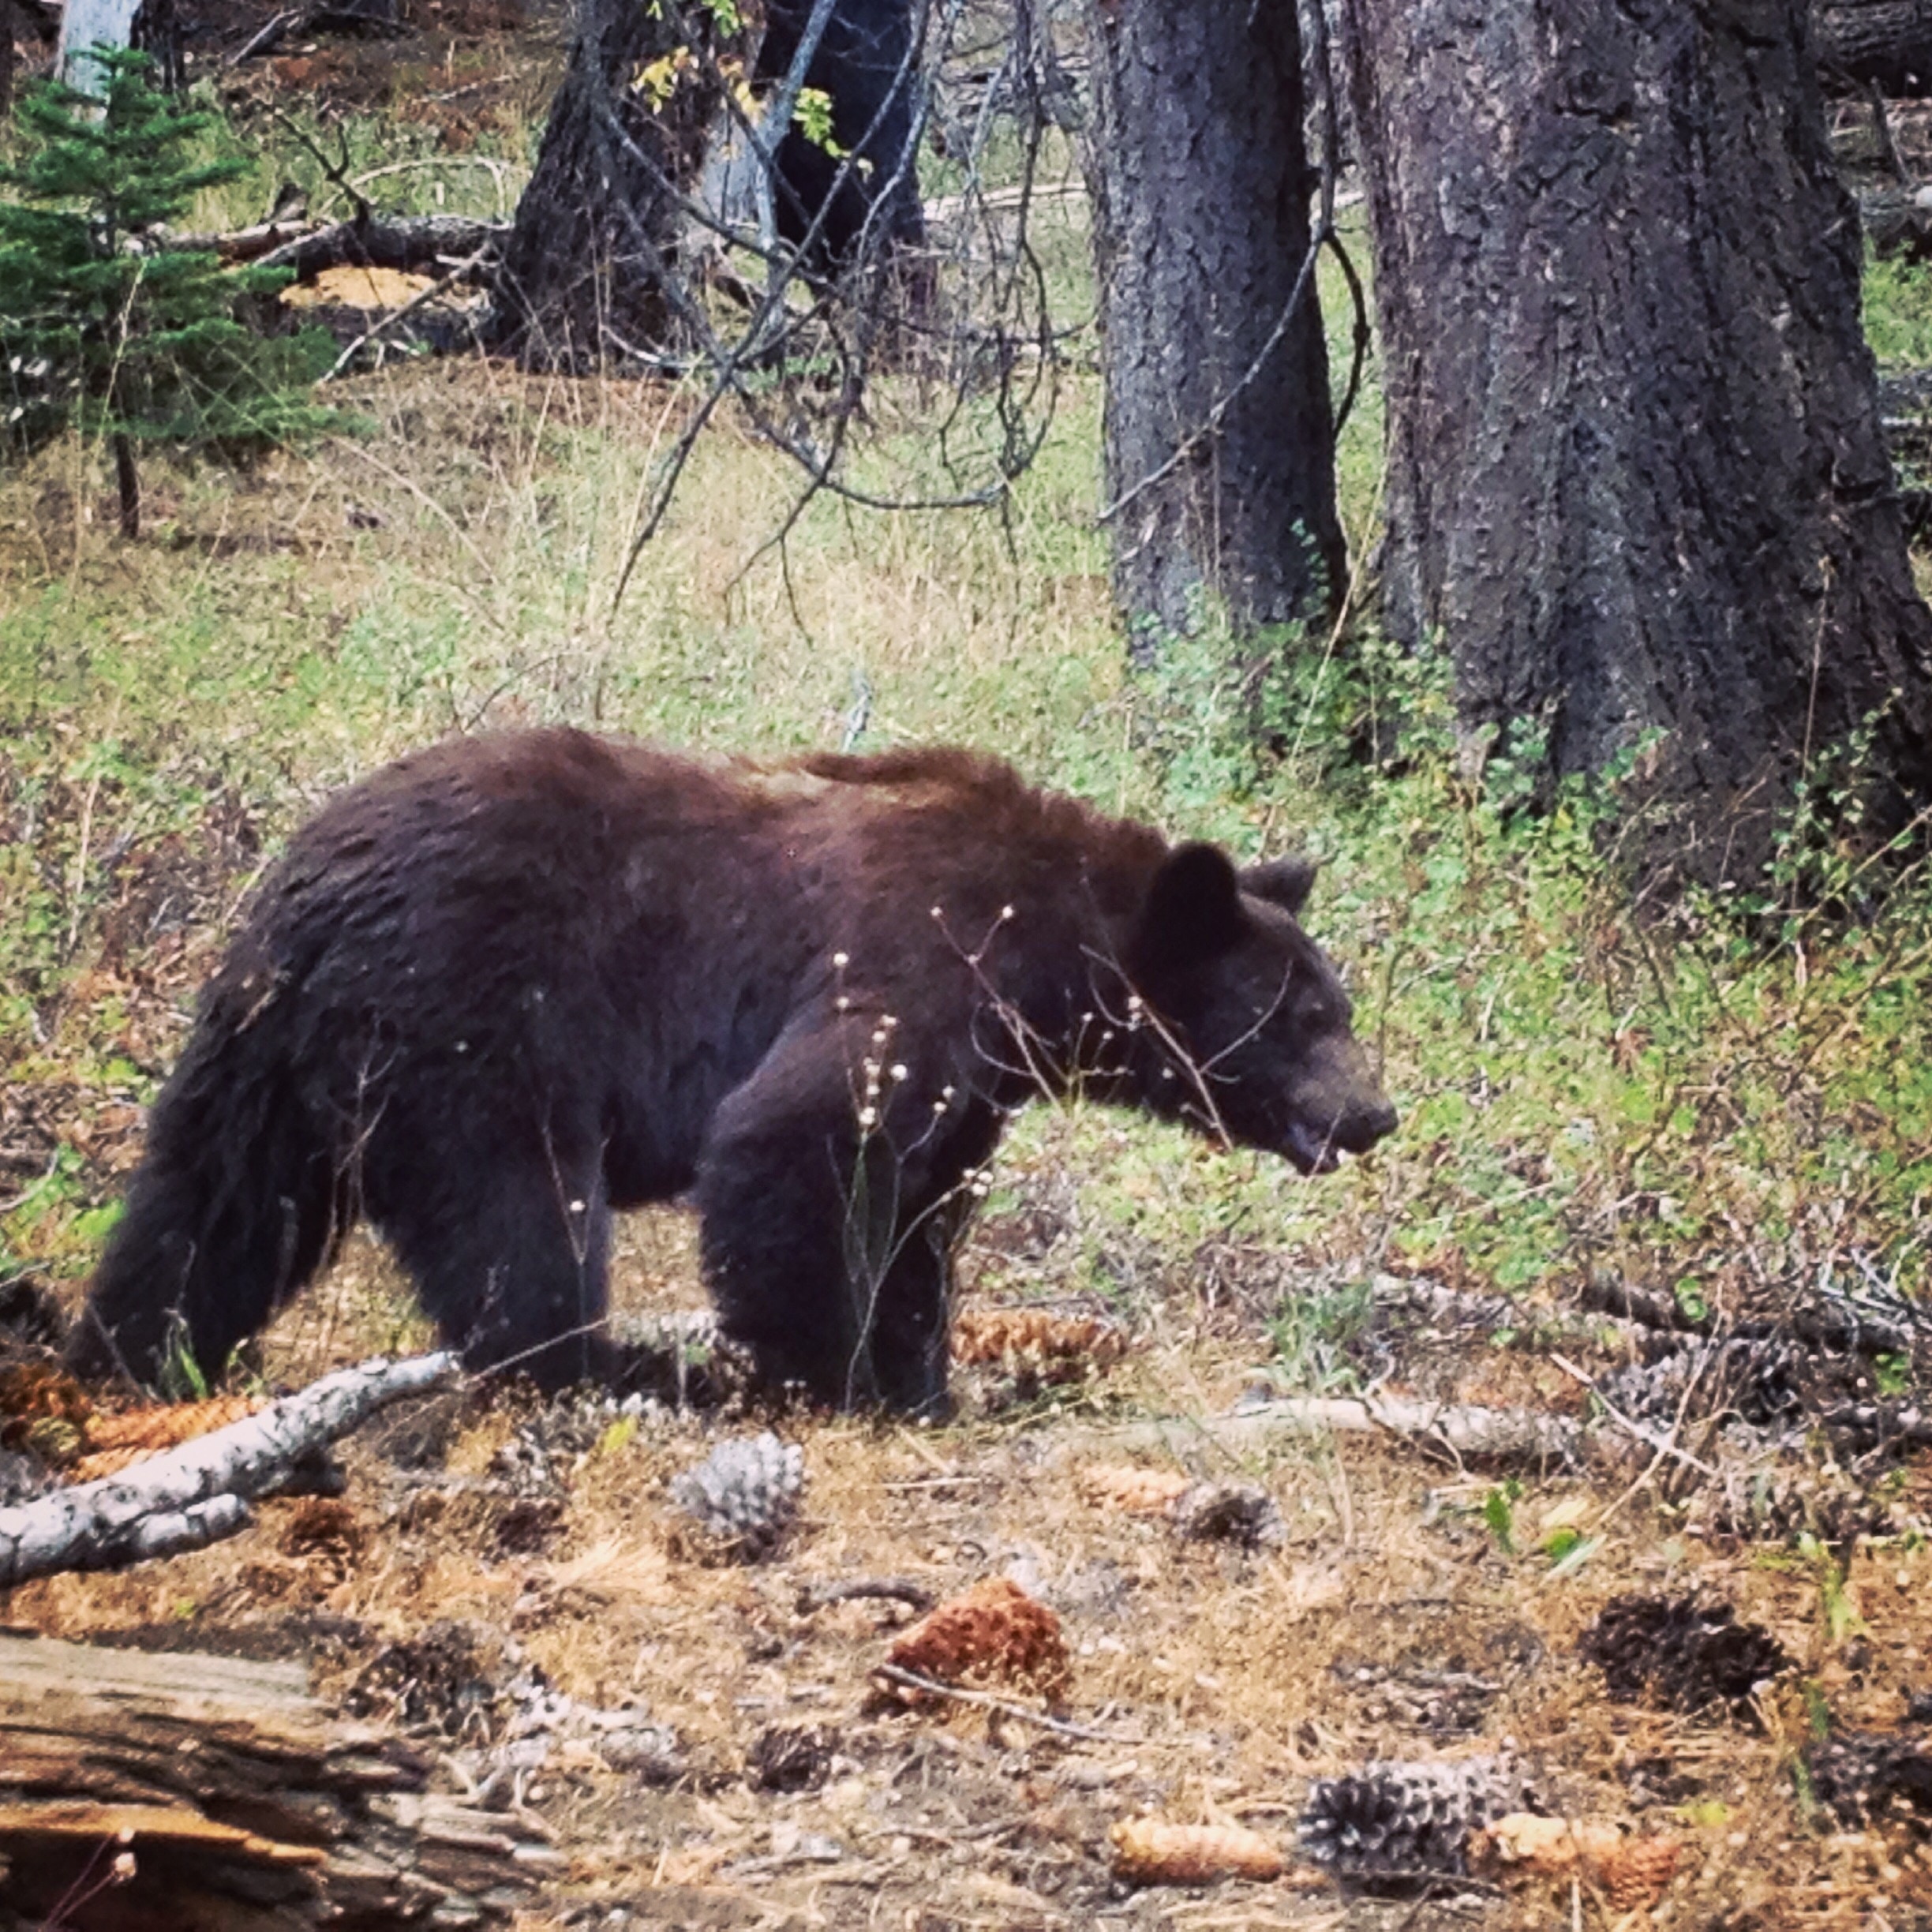 encountering bears are pretty common in California, I guess. Leave the wildlife wild!! 